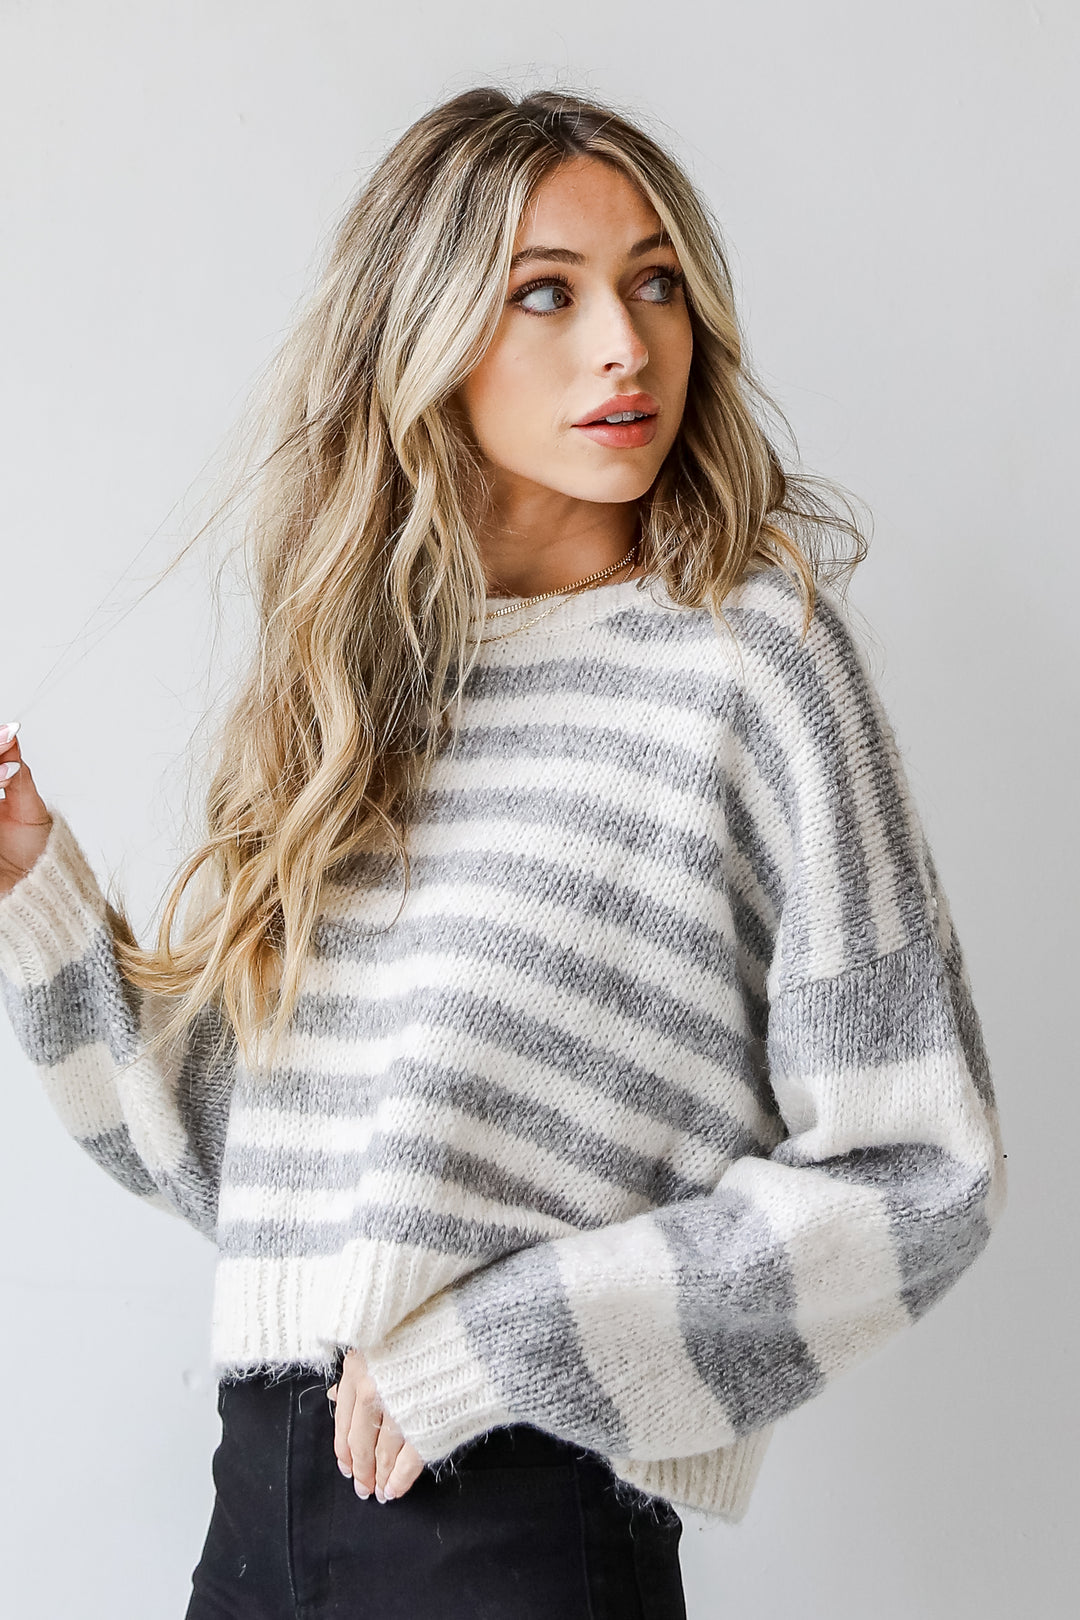 Striped Sweater in heather grey side view